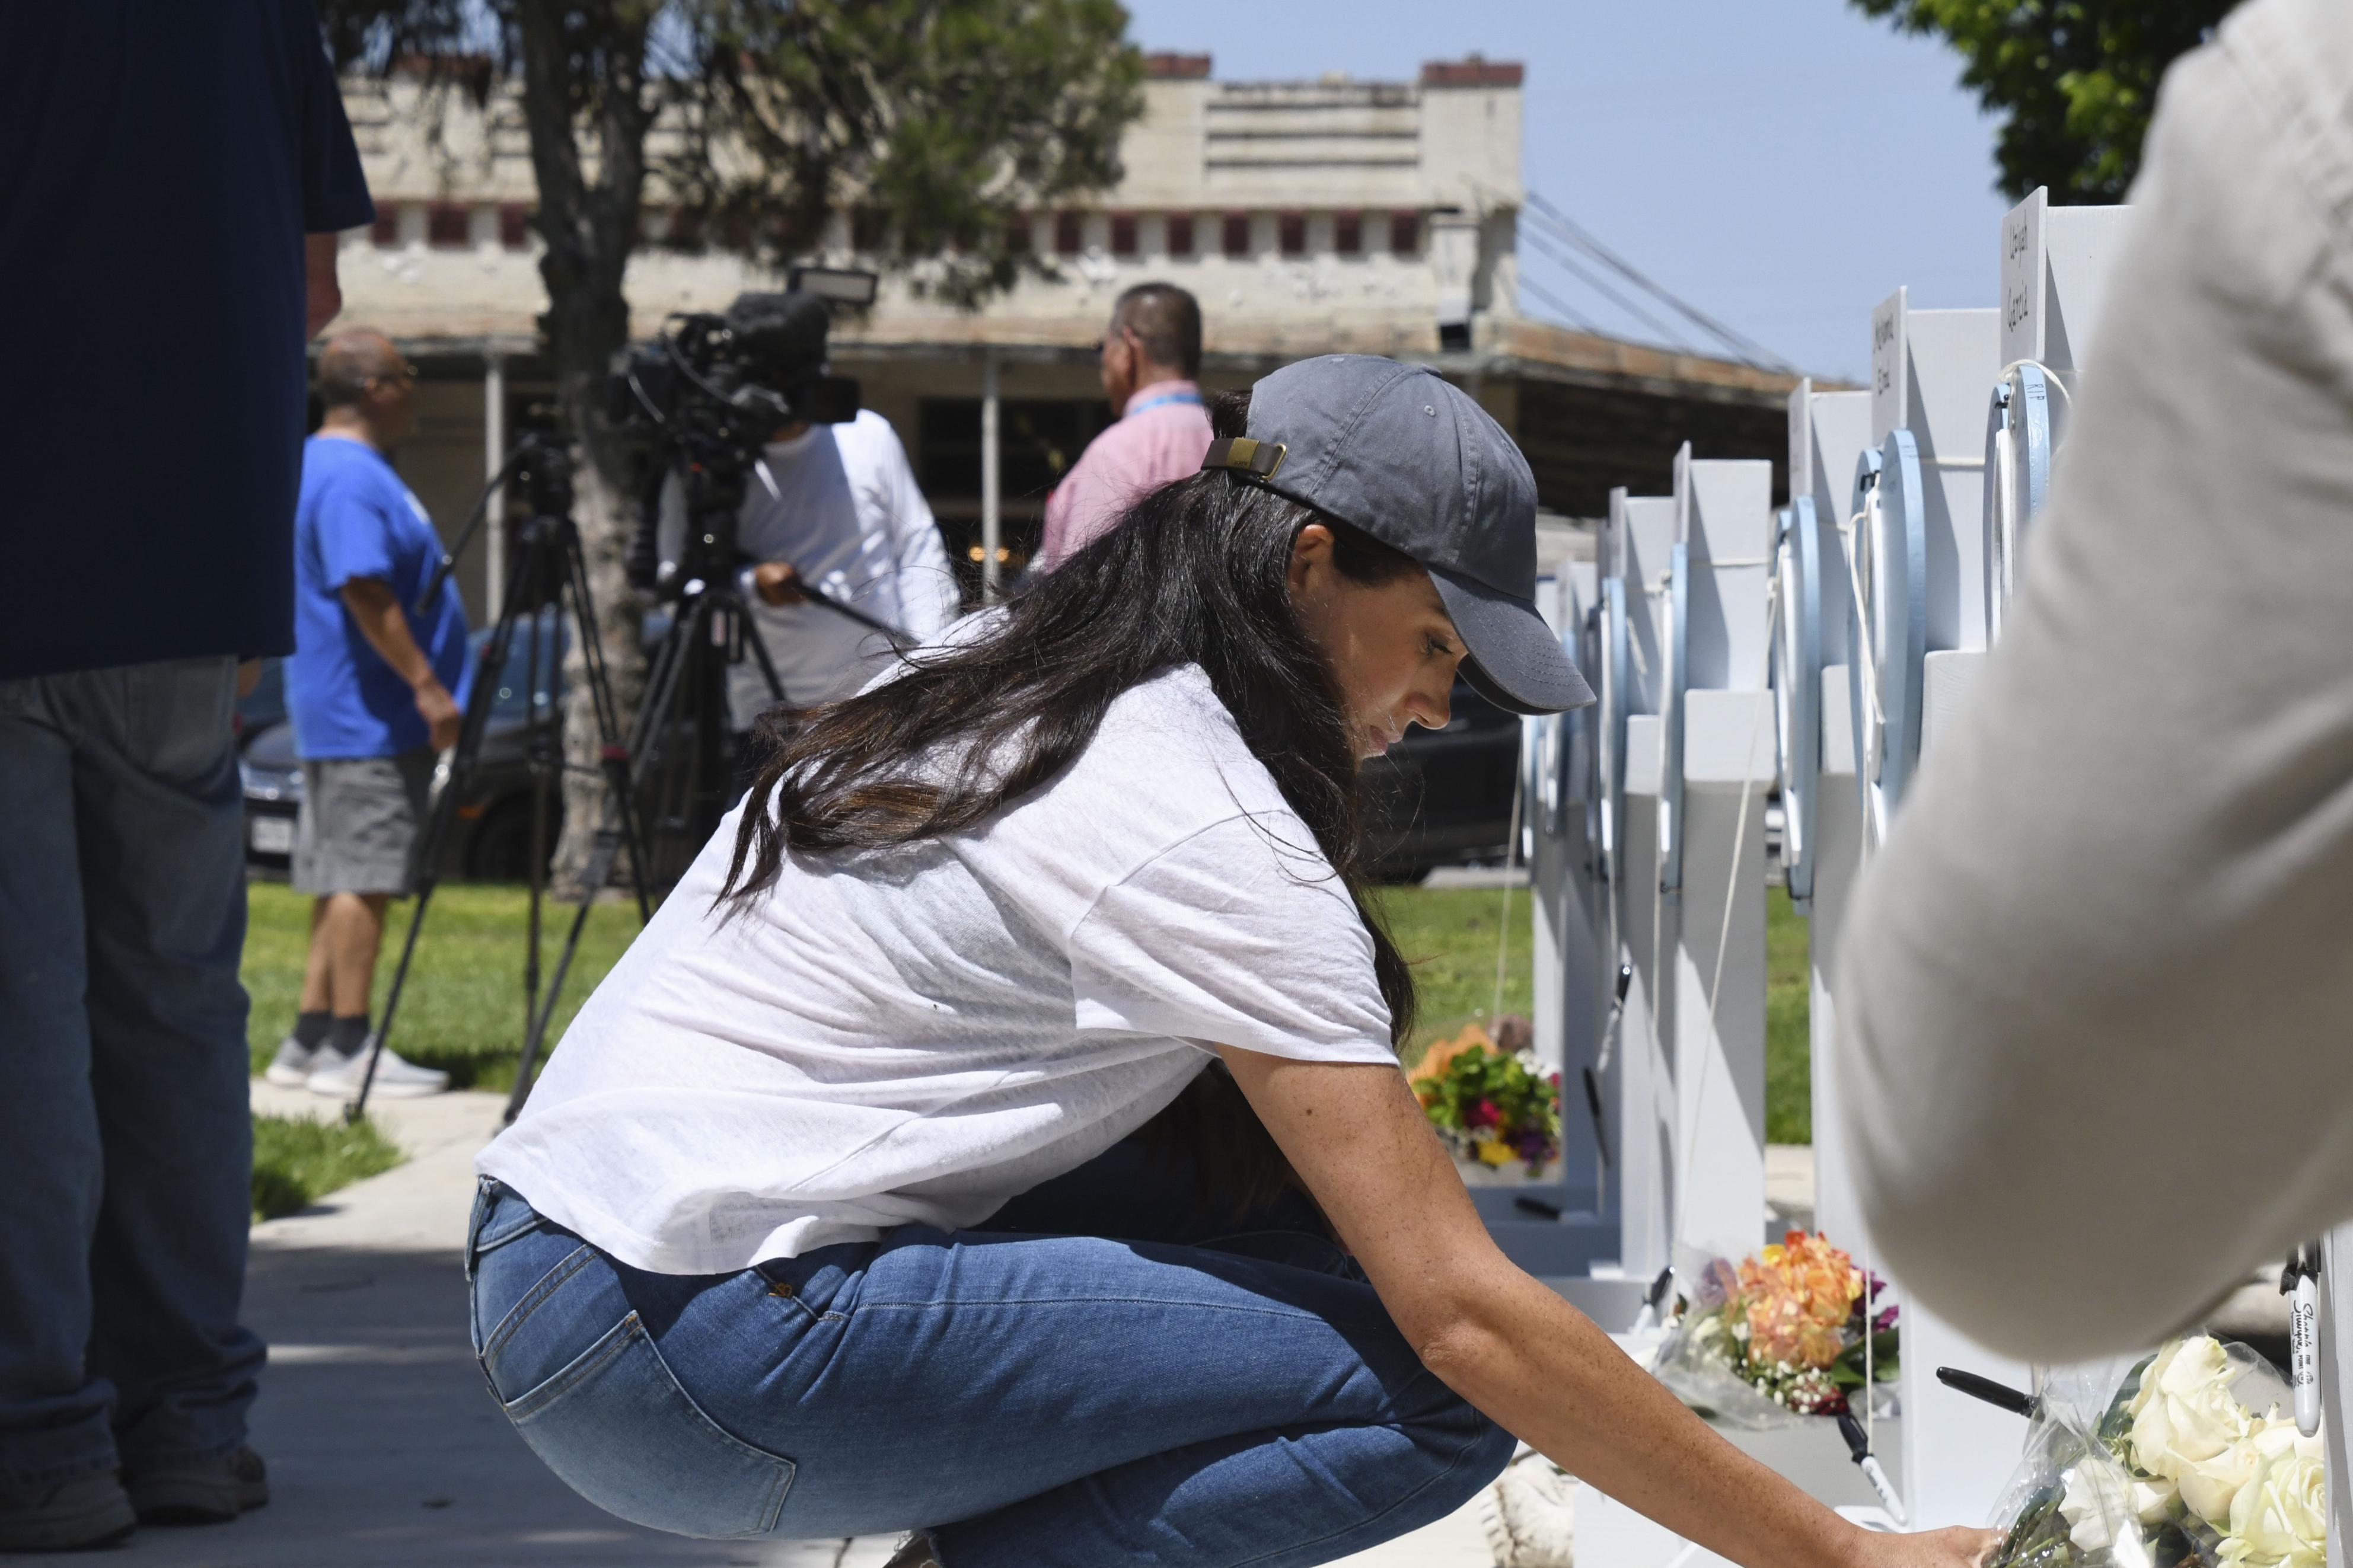 Meghan Markle paying her respects to Uvalde, Texas shooting victims on May 26, 2022 | Source: Getty Images